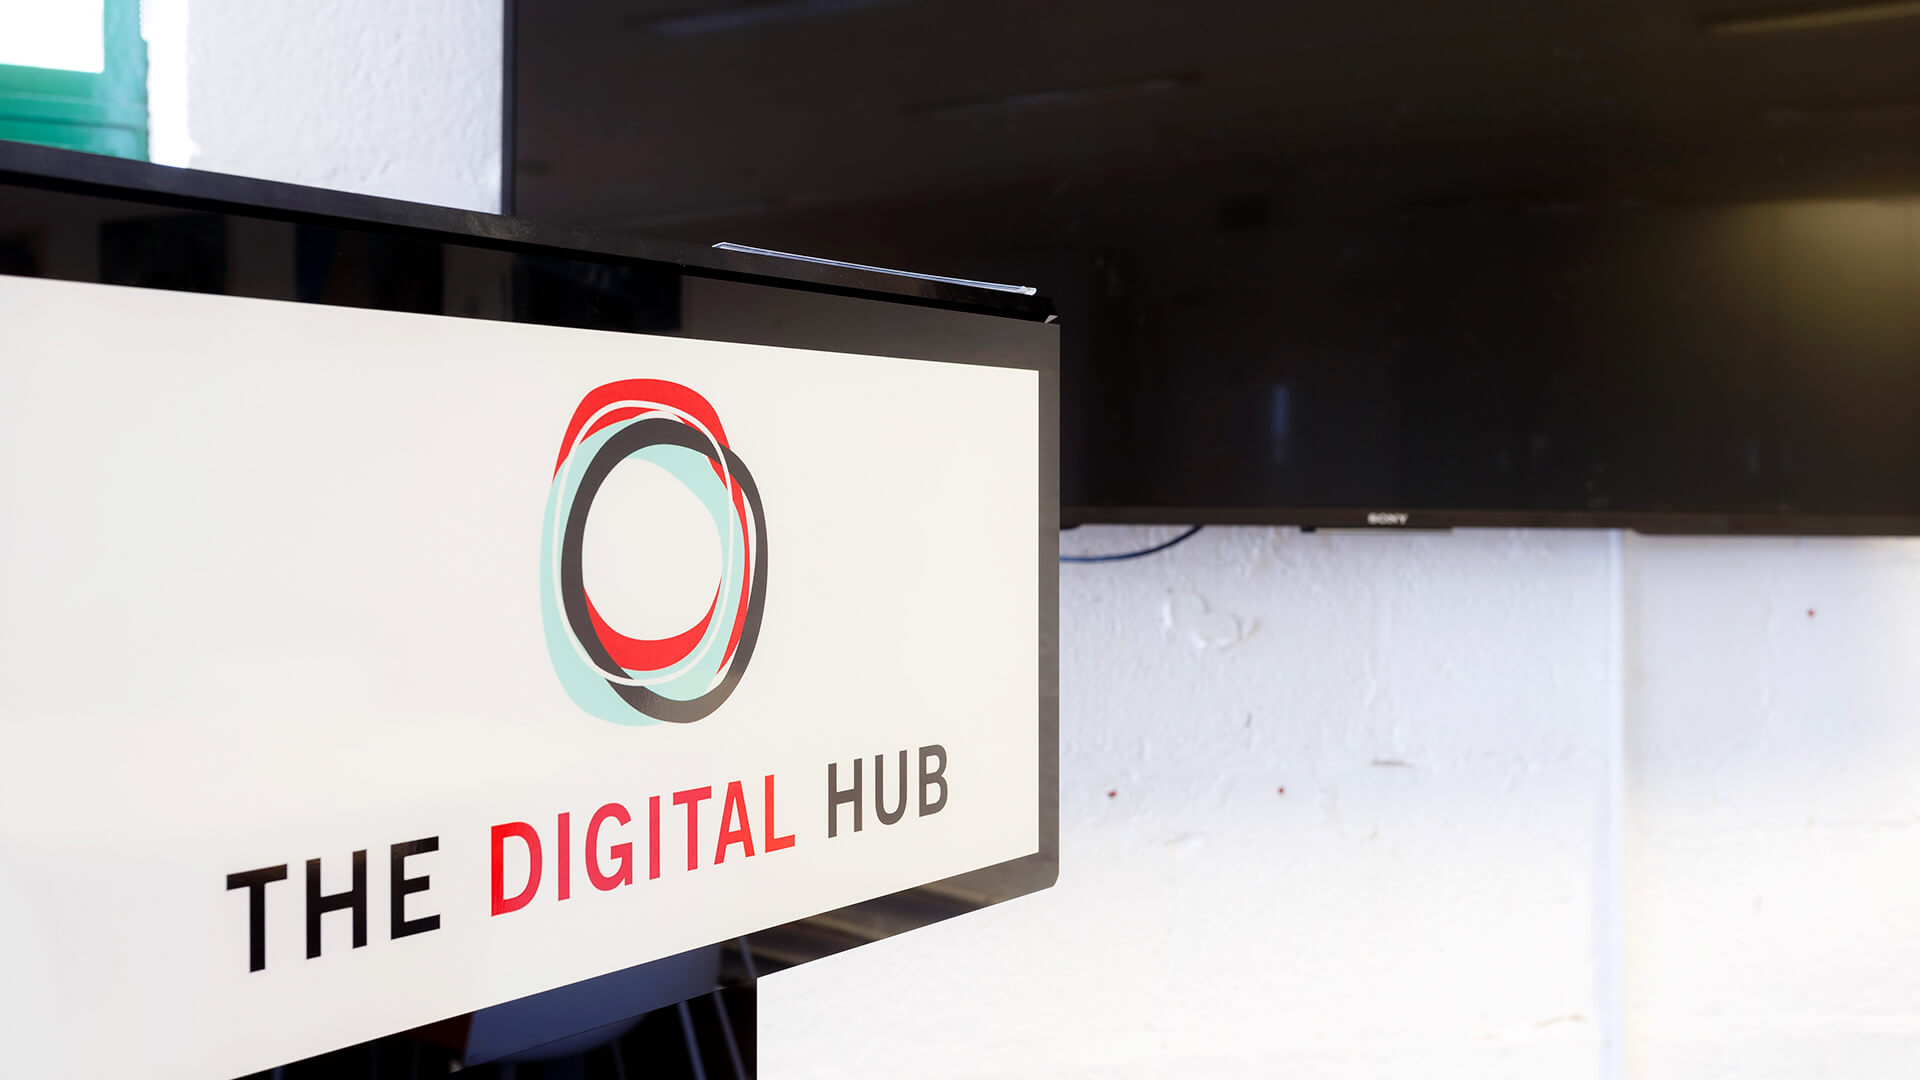 'The Digital Hub' logo displays on a screen in the Learning Studio